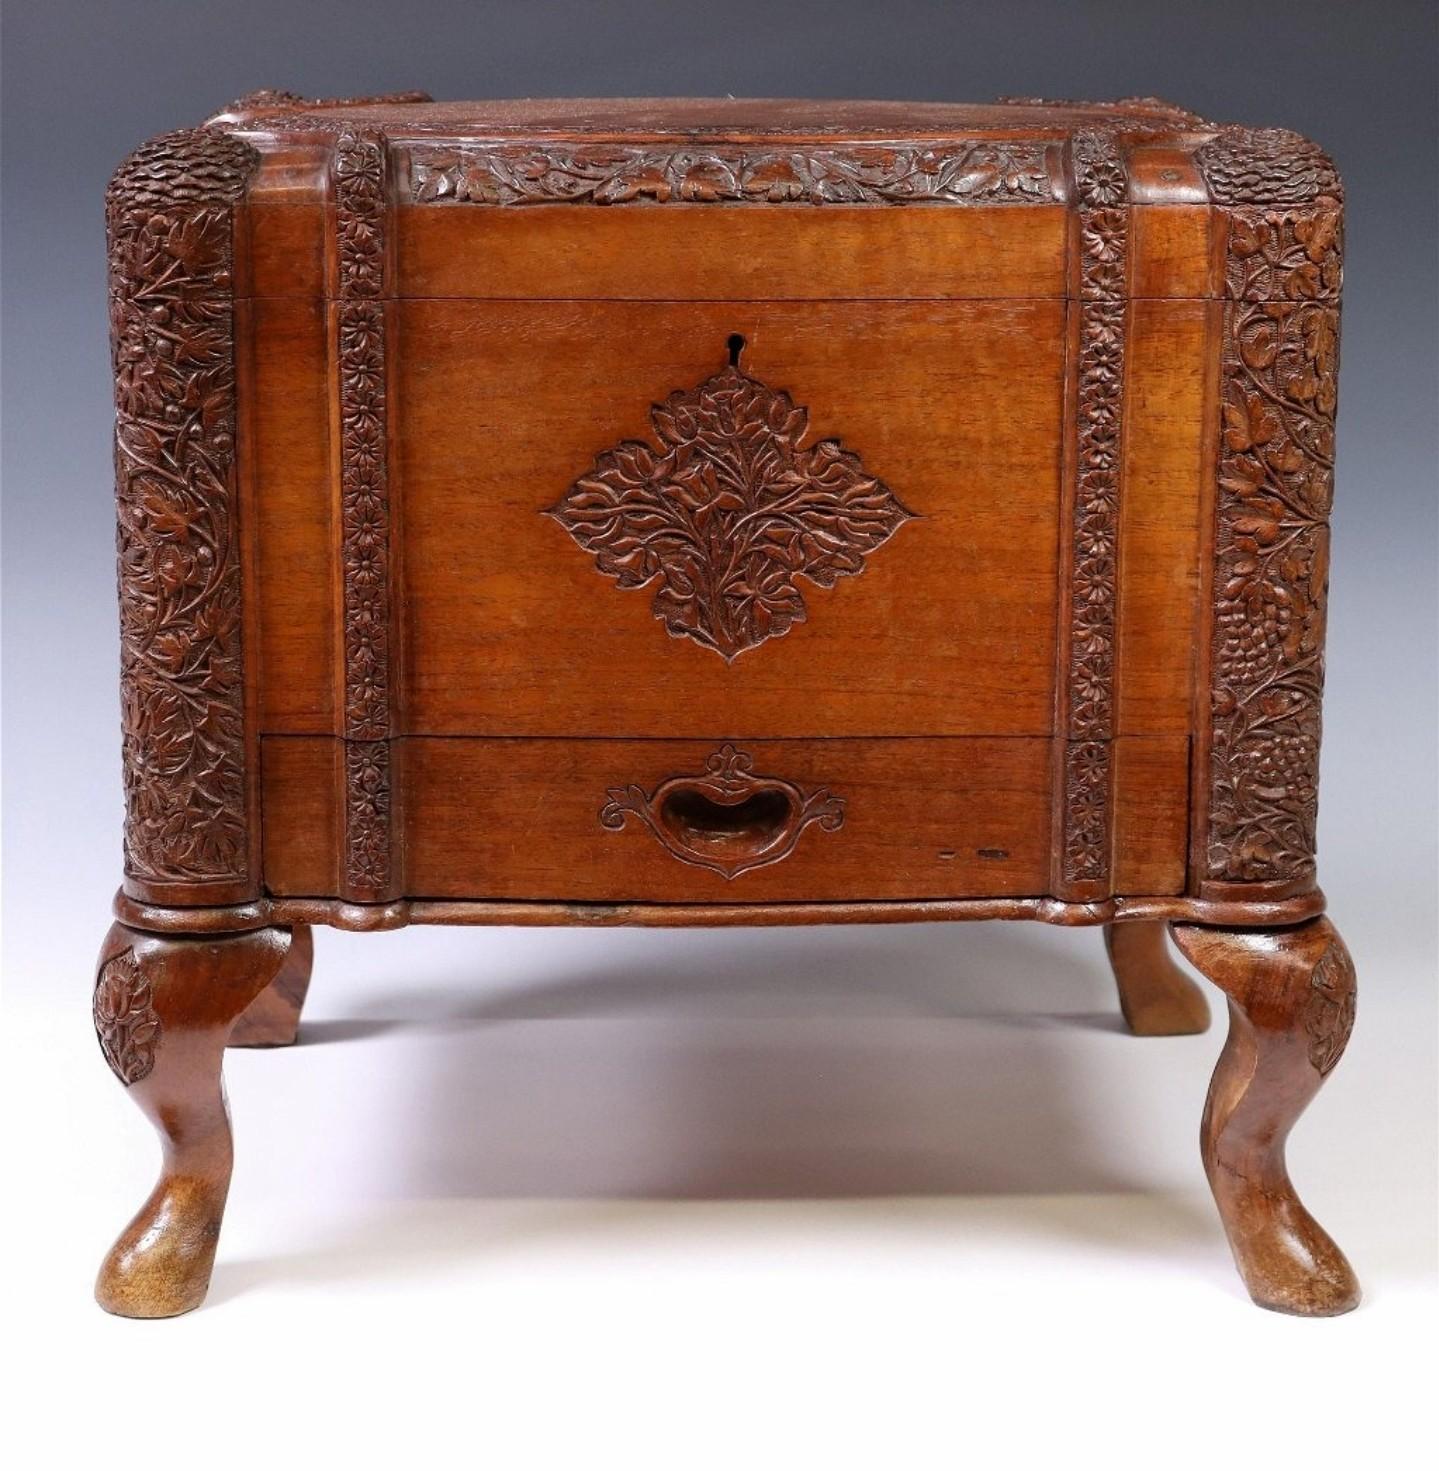 A scarce antique circa 1900 South Asian hand carved wooden decorative table box / jewel casket.

Hand-crafted in the early 20th century, likely British Ceylon (present day Sri Lanka) / Anglo-Indian (Colonial rule of India), featuring intricately